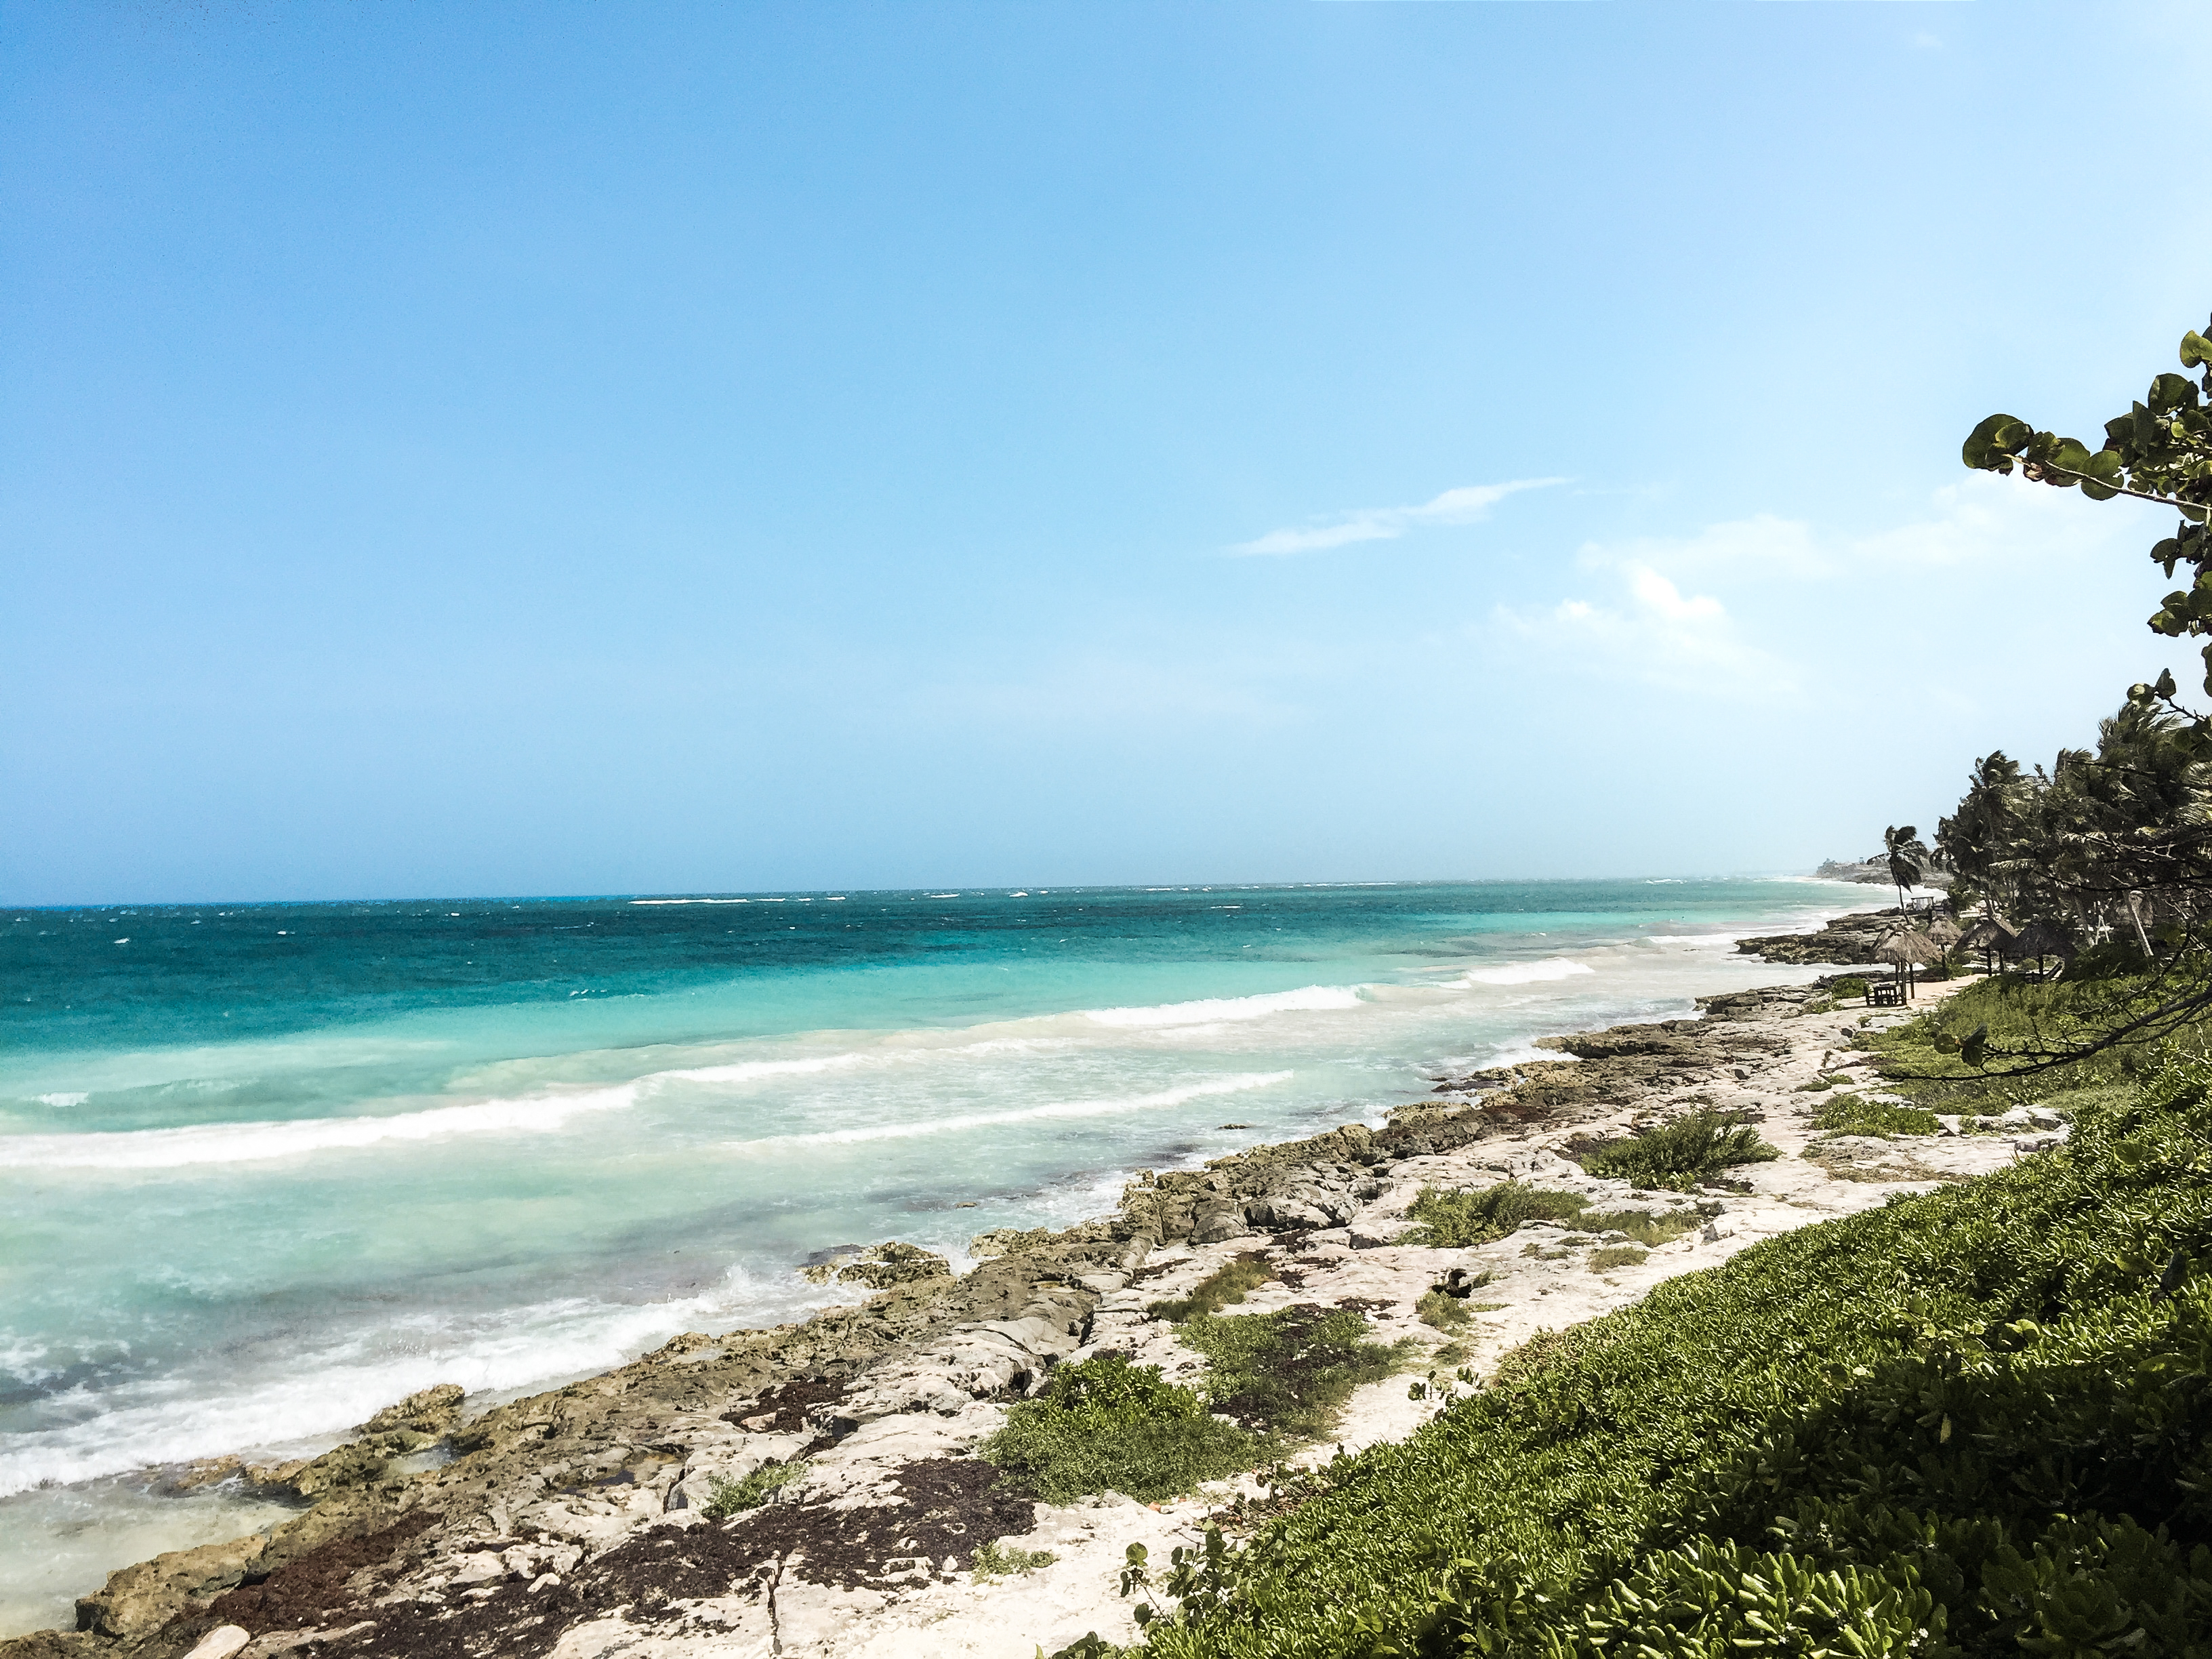 Tulum: A relaxed, hippy-chic paradise